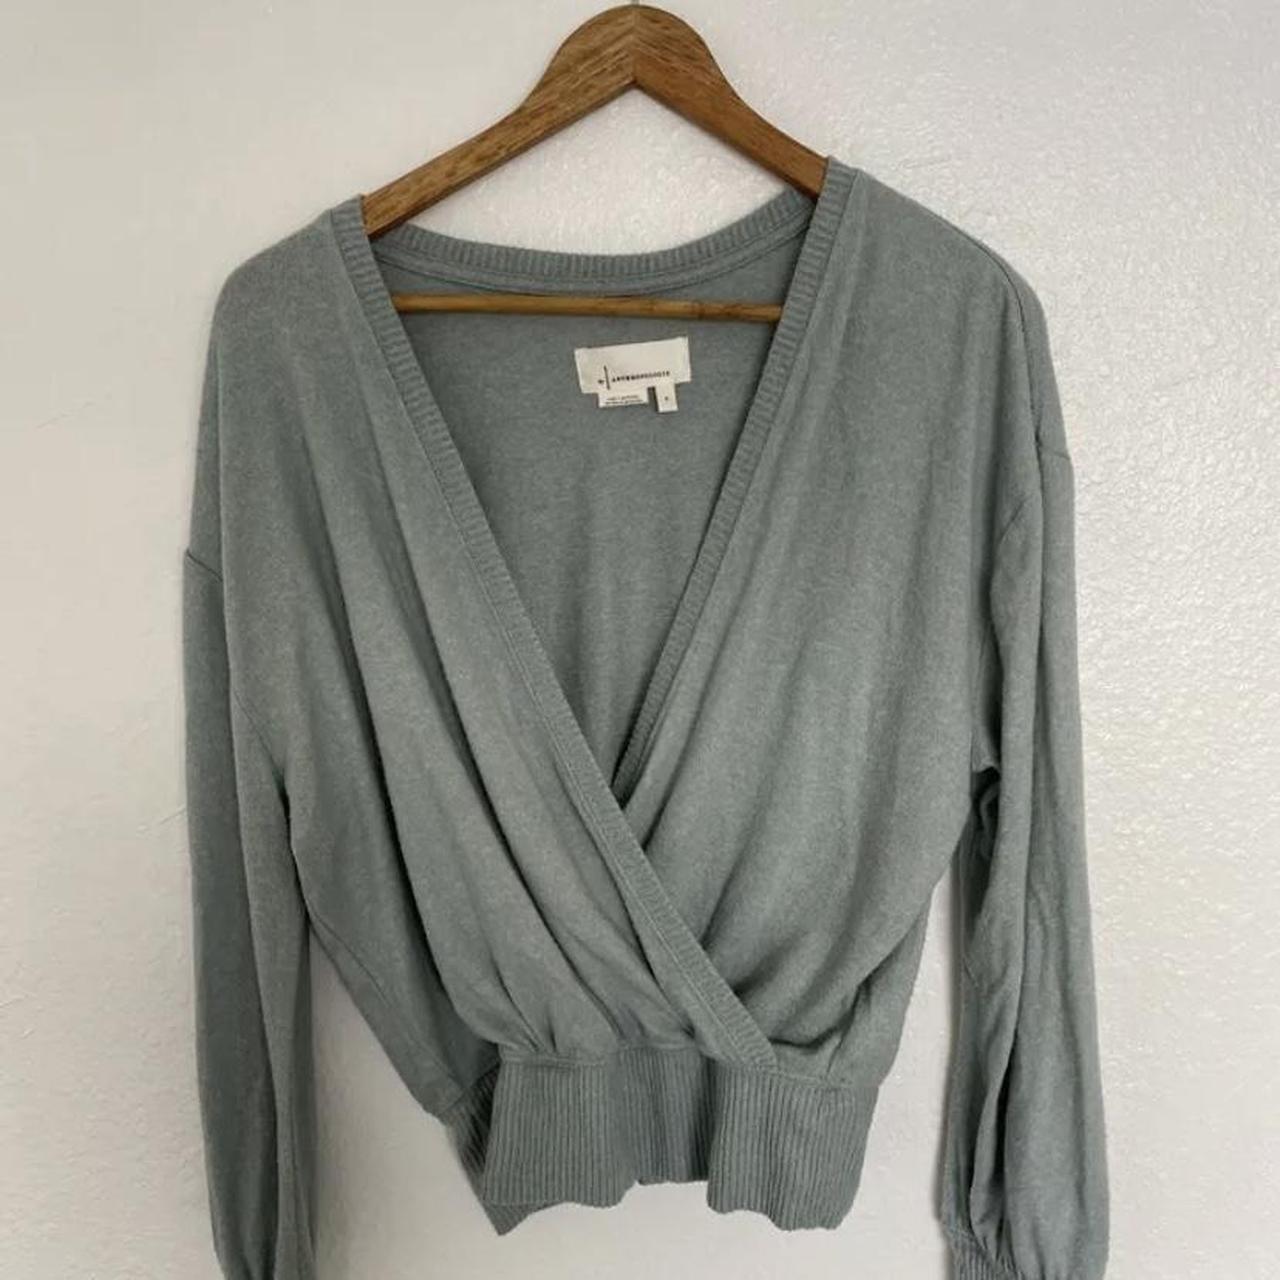 Anthropologie Women's Blue and Green Jumper (6)